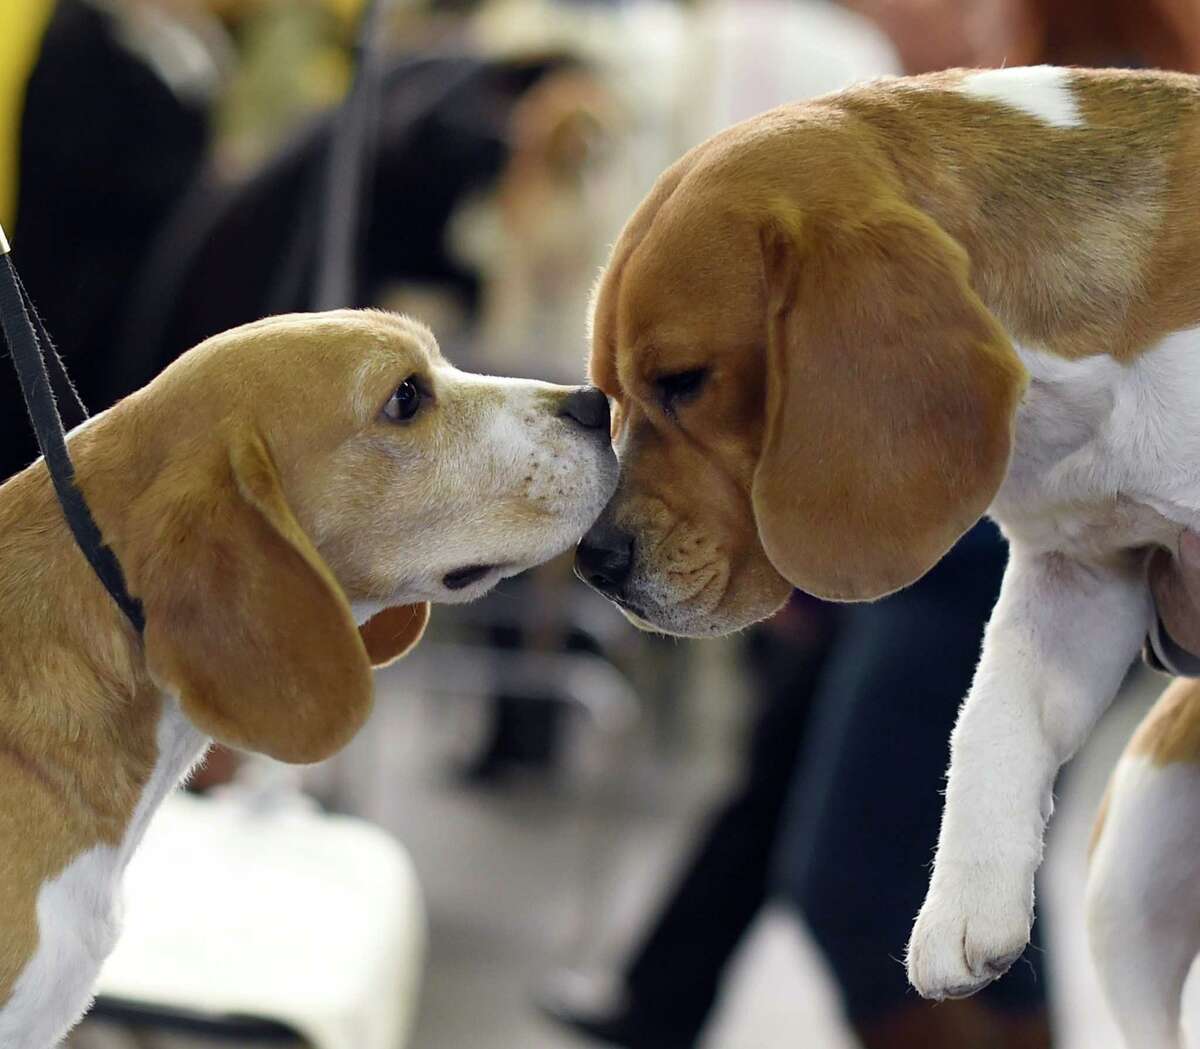 Beagles in the benching area at Pier 92 and 94 in New York City on the first day of competition at the 139th Annual Westminster Kennel Club Dog Show.